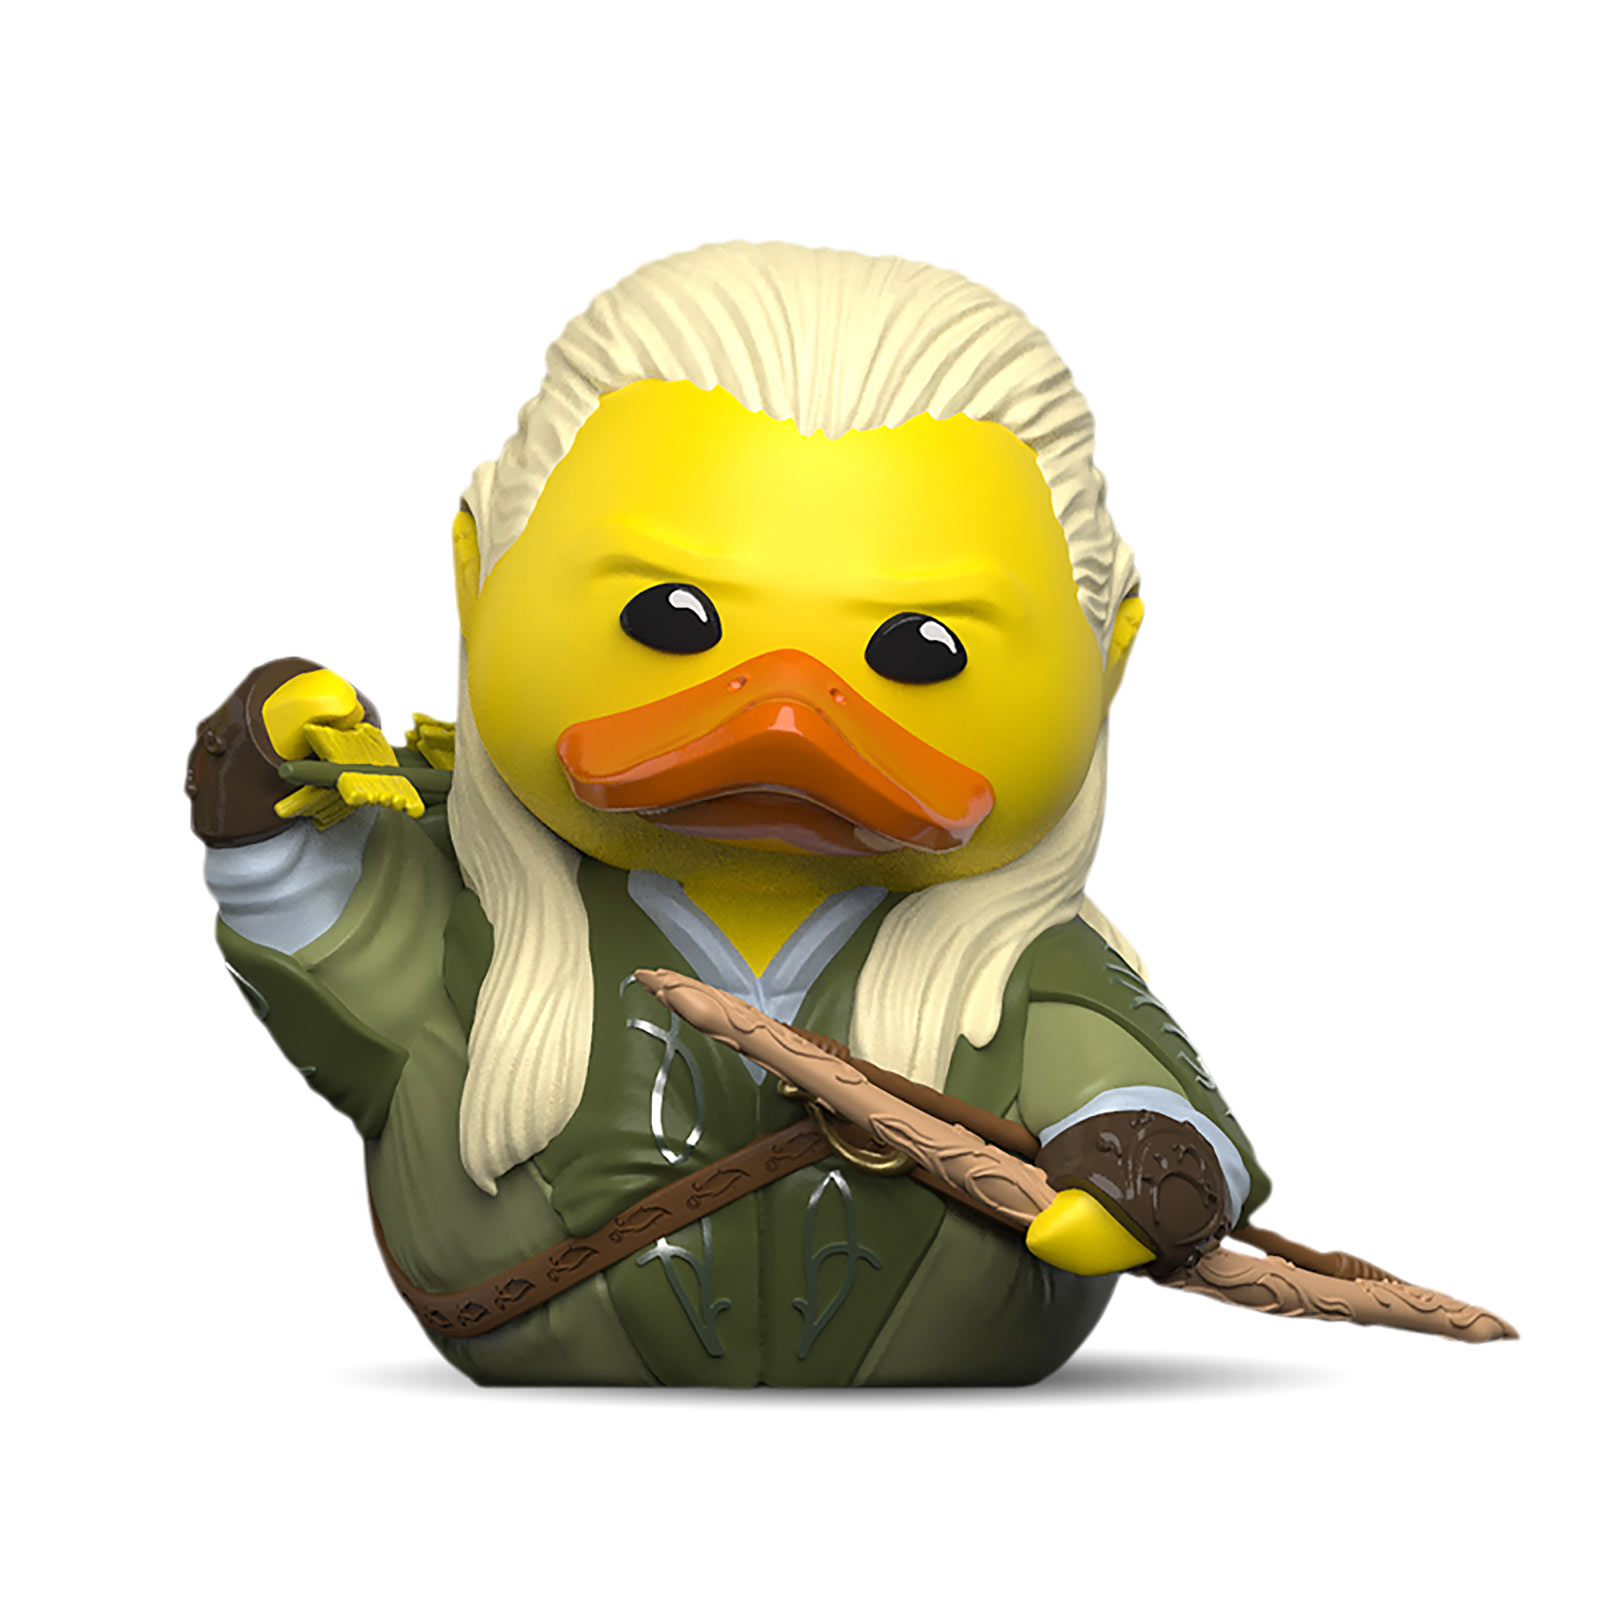 Lord of the Rings - Legolas TUBBZ Decorative Duck